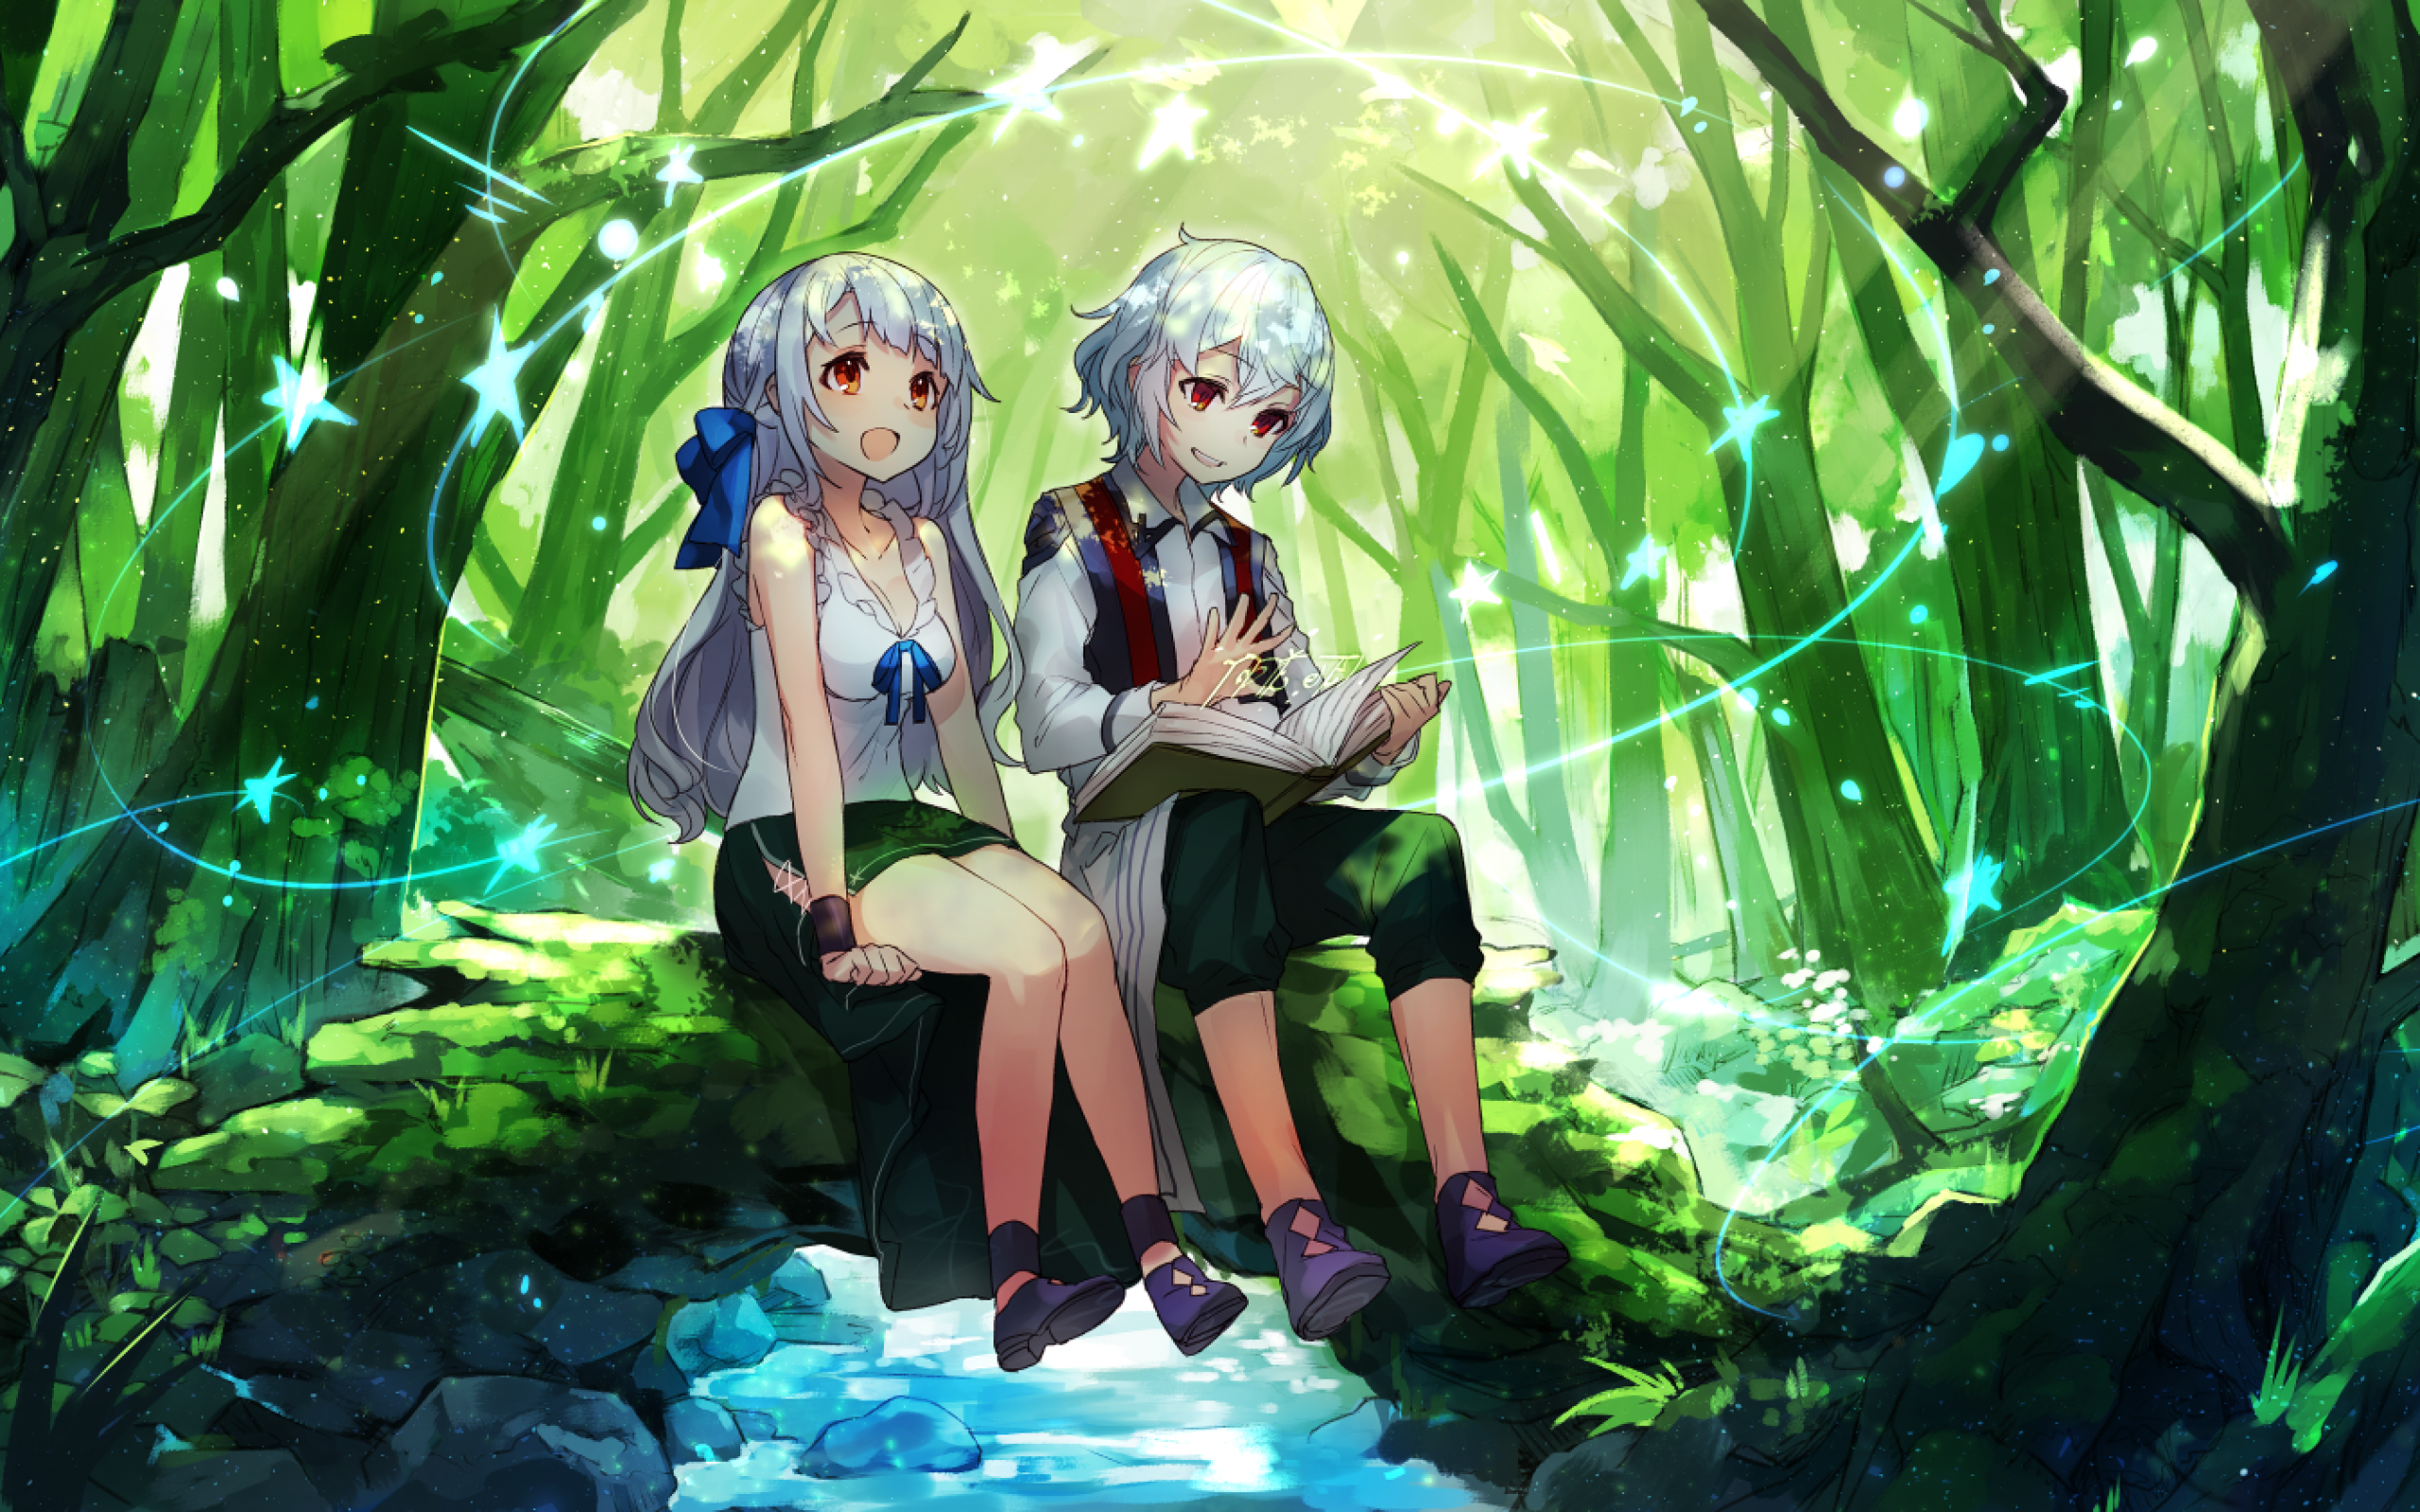 Download 2560x1600 Anime Twins, Girl And Boy, Forest, Reading A